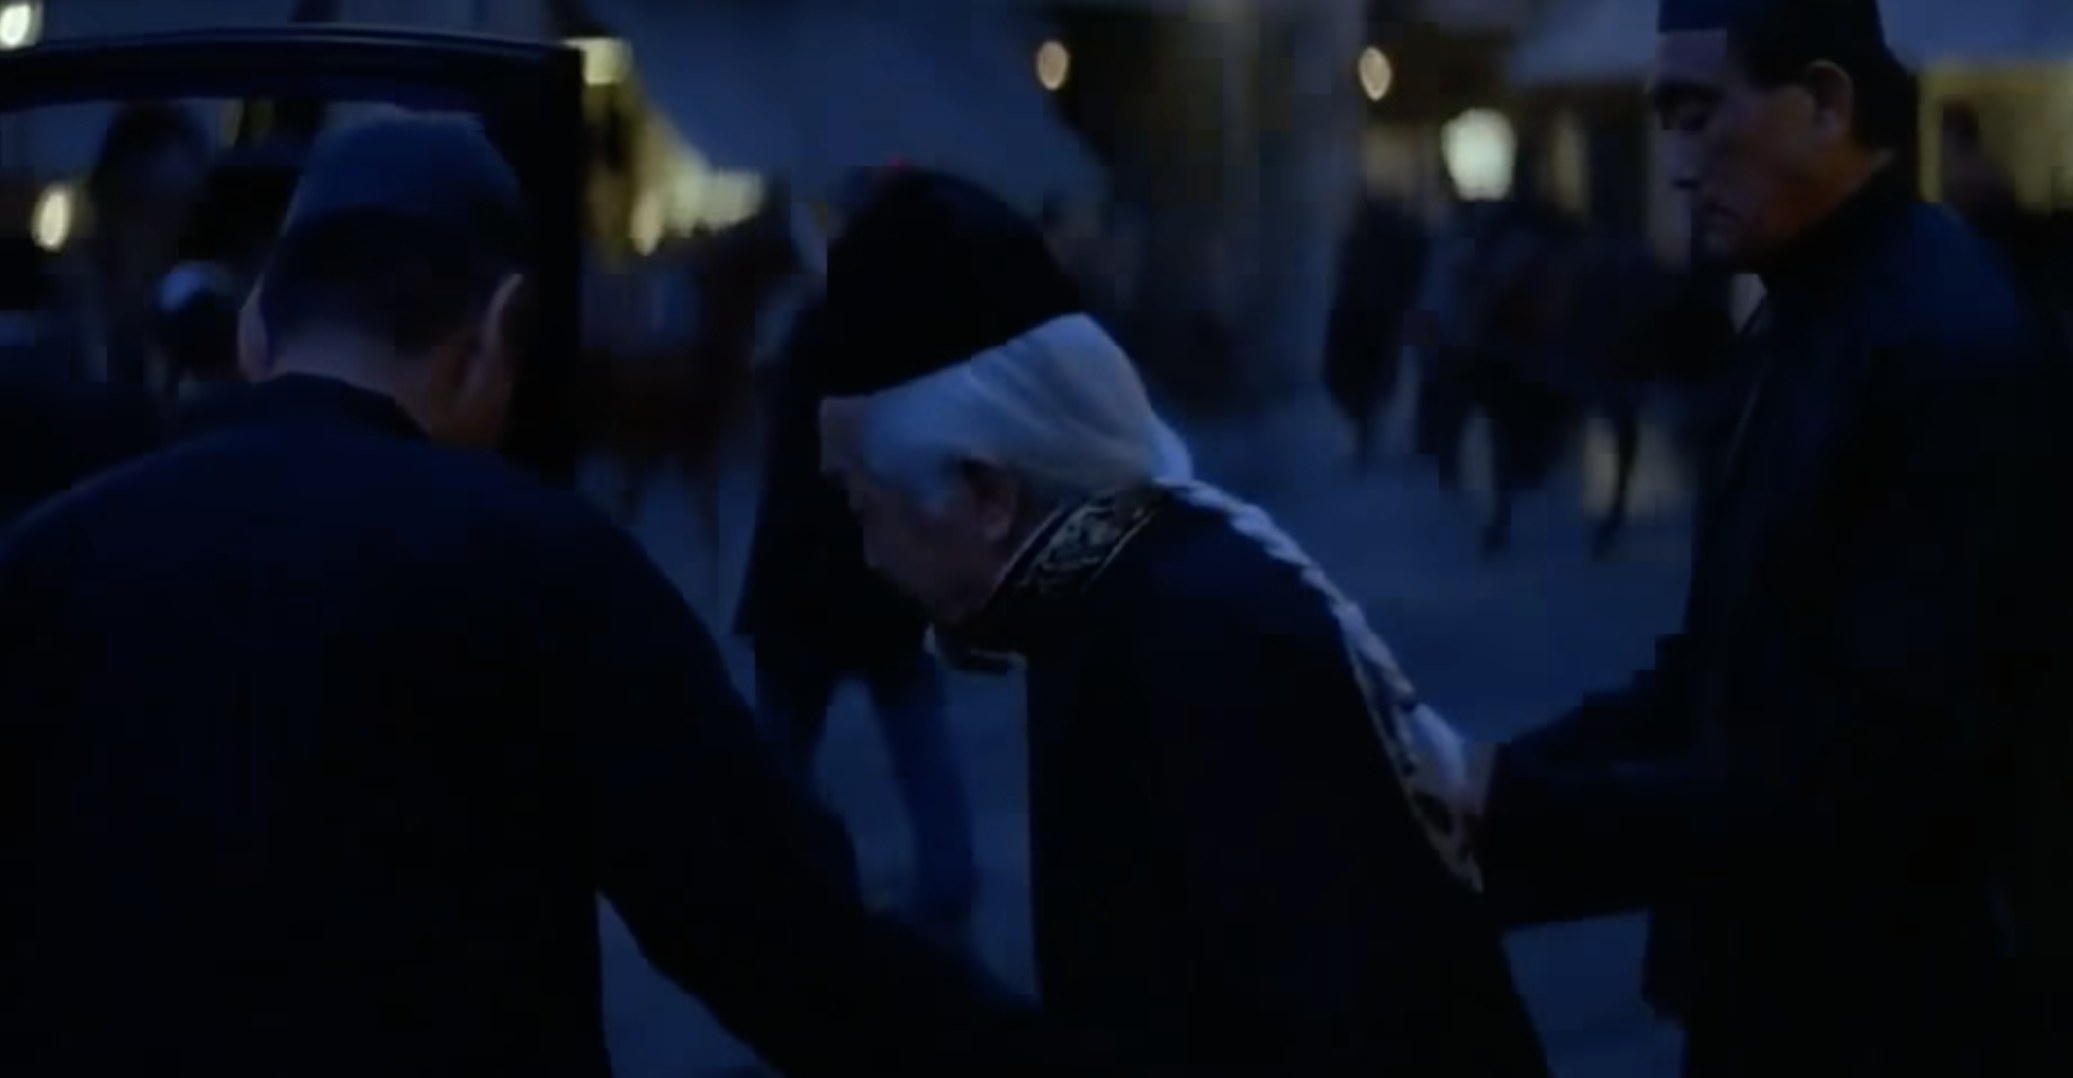 A magician in The Prestige is escorted into a carriage by assistants